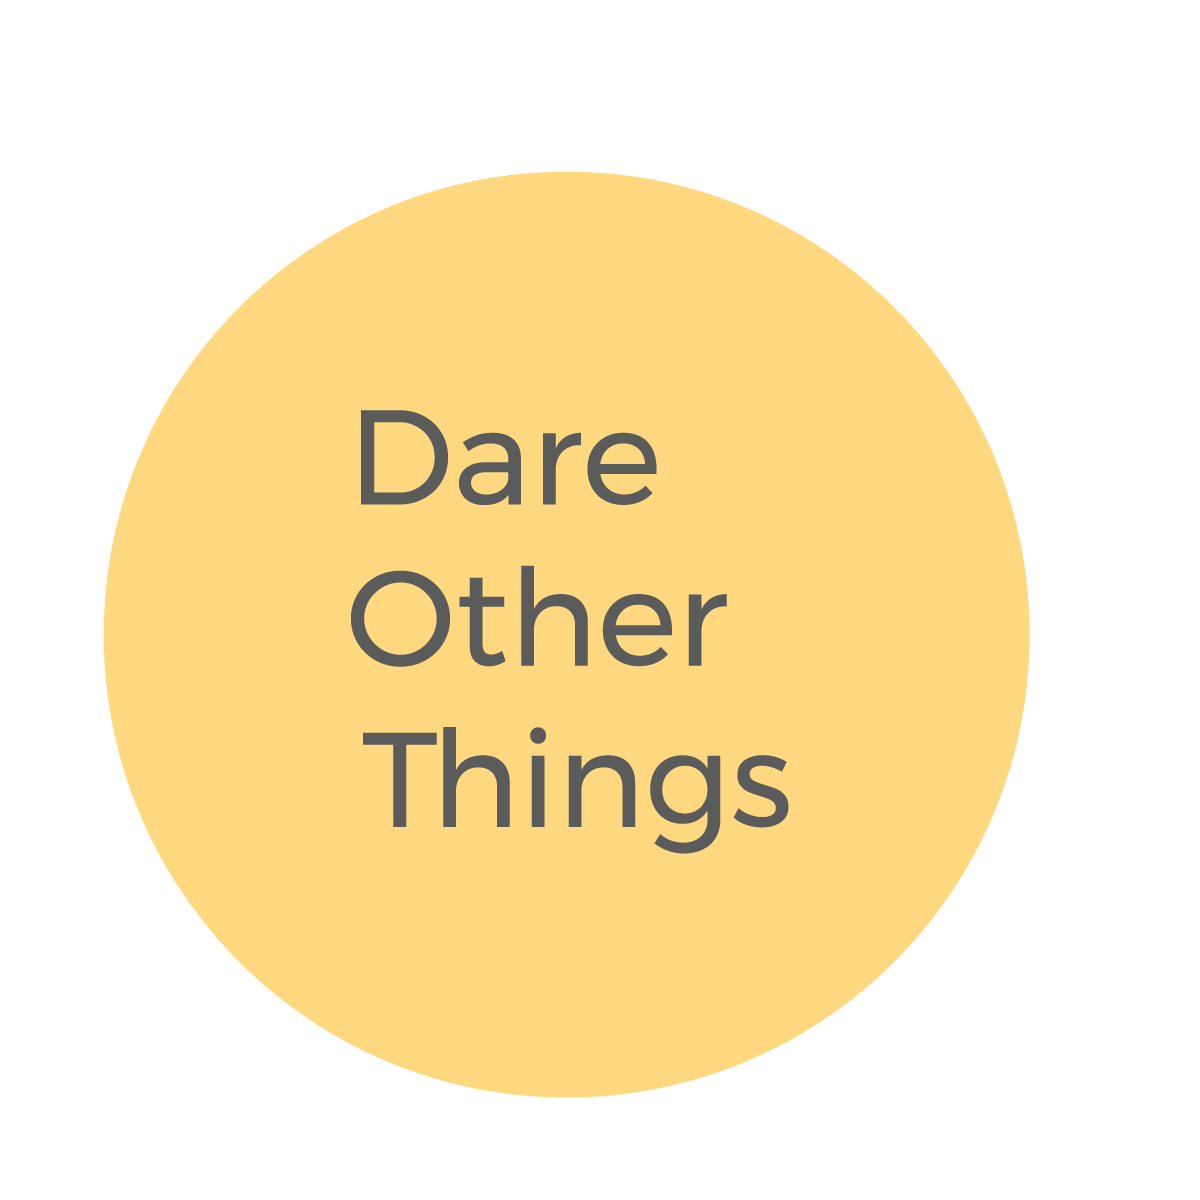 dare other things image ronde pour section daccueil